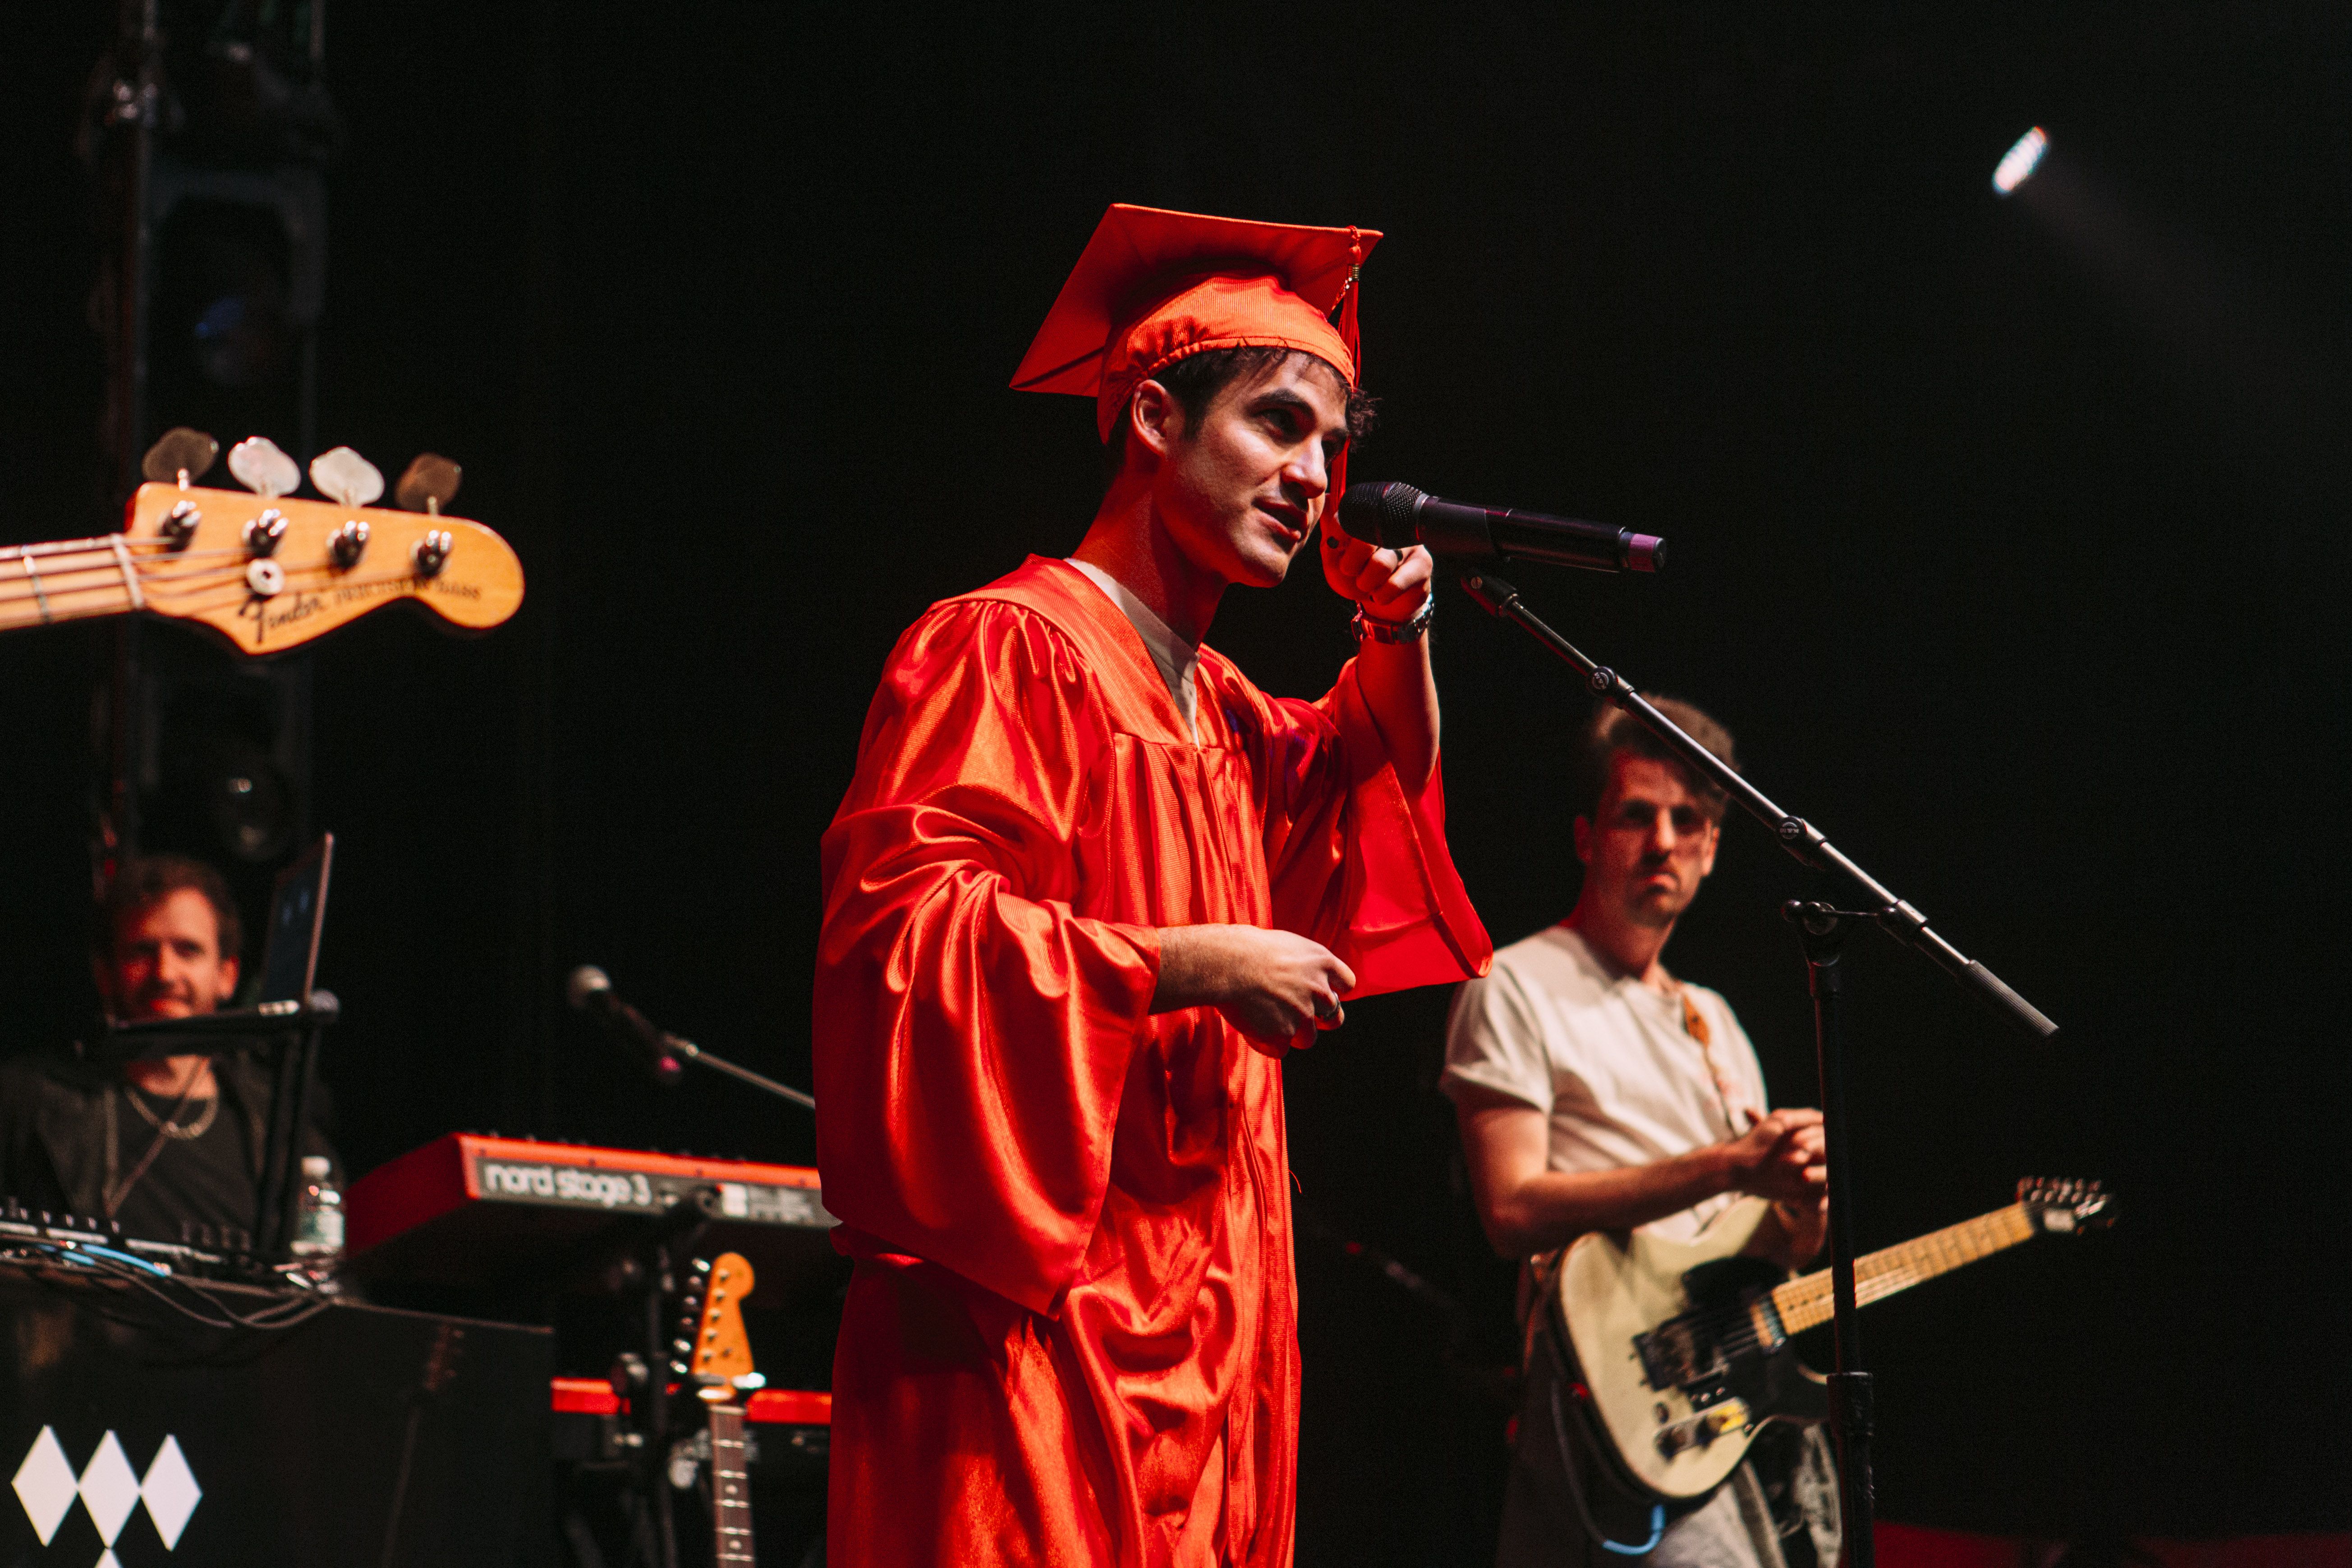 Artist wearing a cap and gown on stage